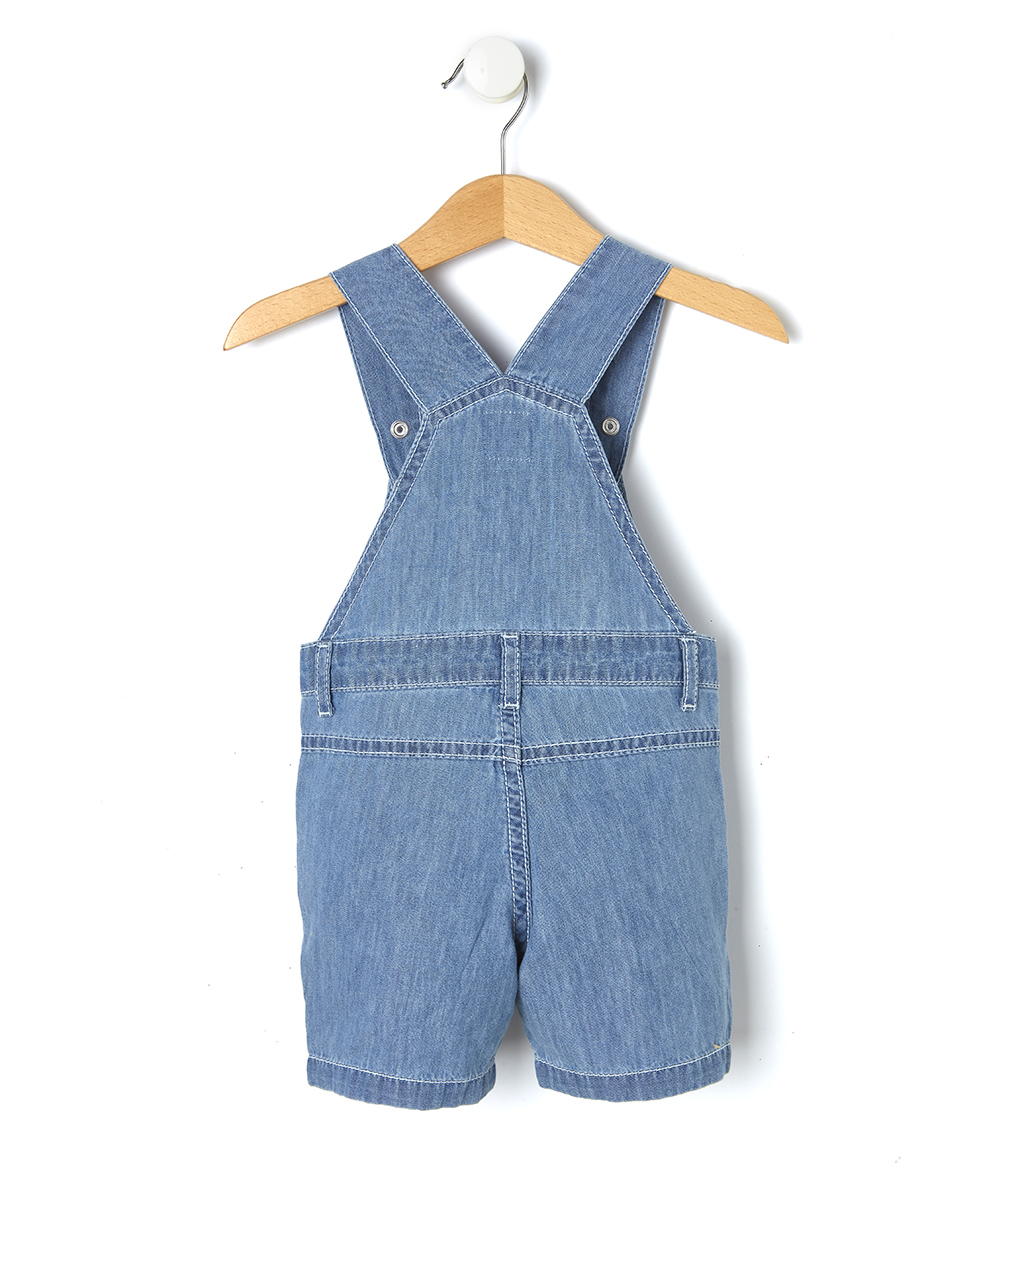 Salopette in chambray